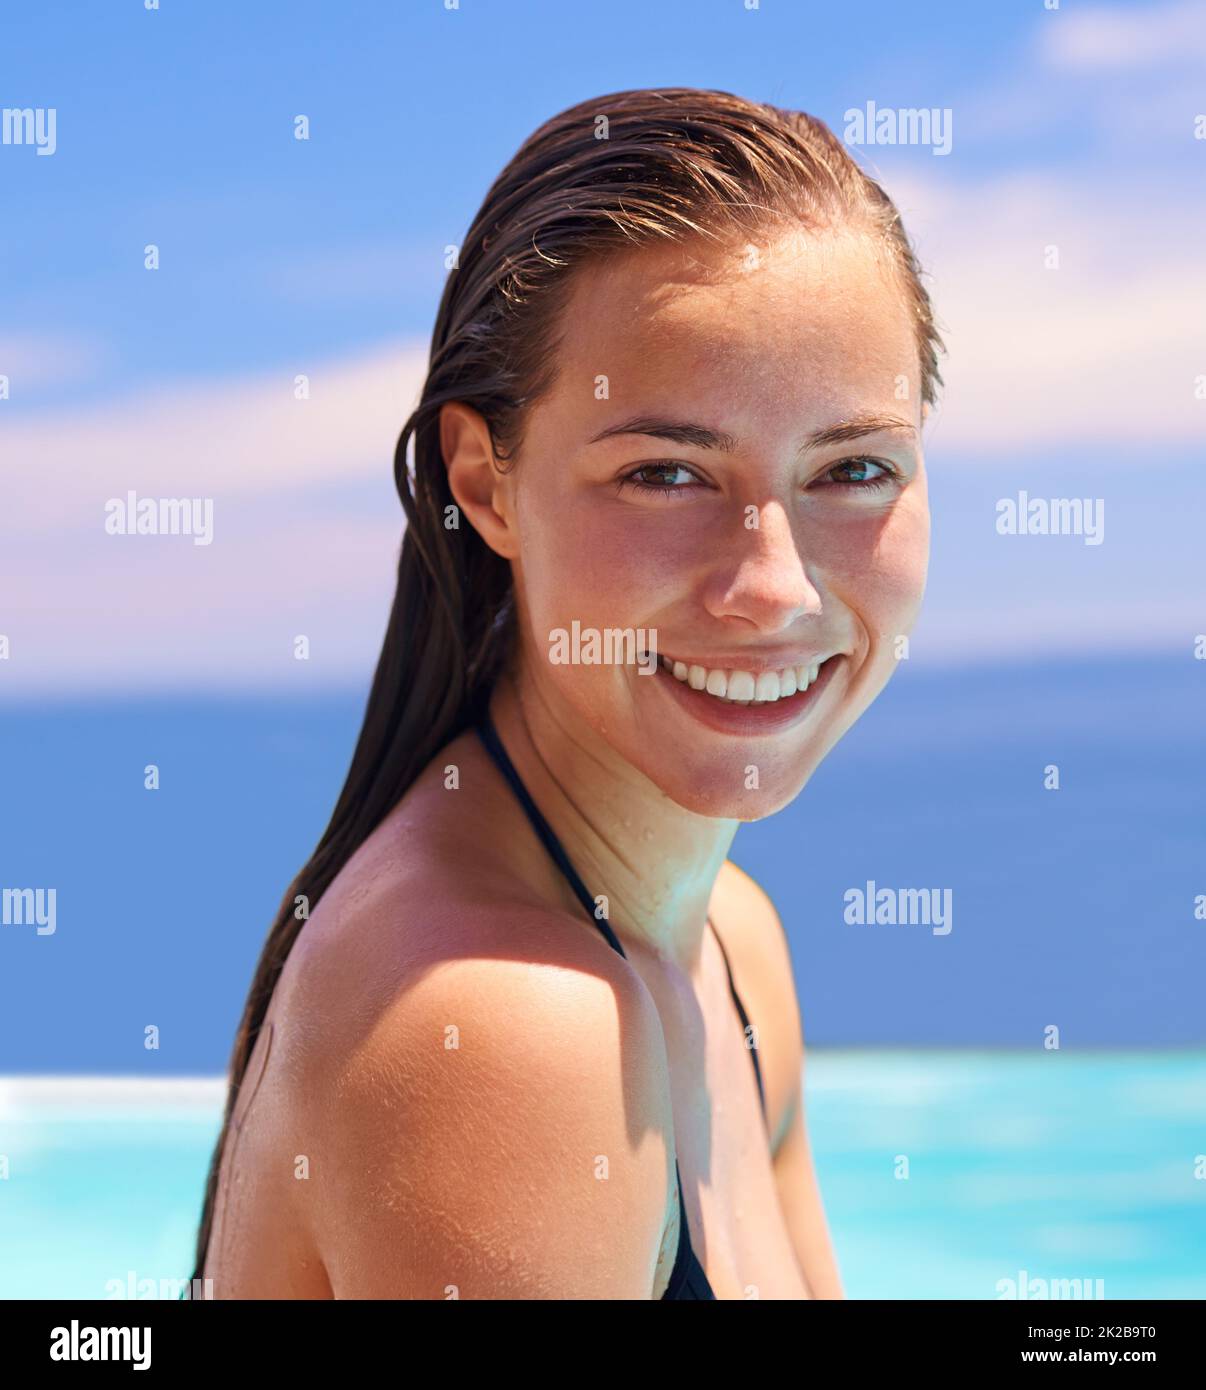 She loves being in the water. An attractive young woman enjoying a swim. Stock Photo